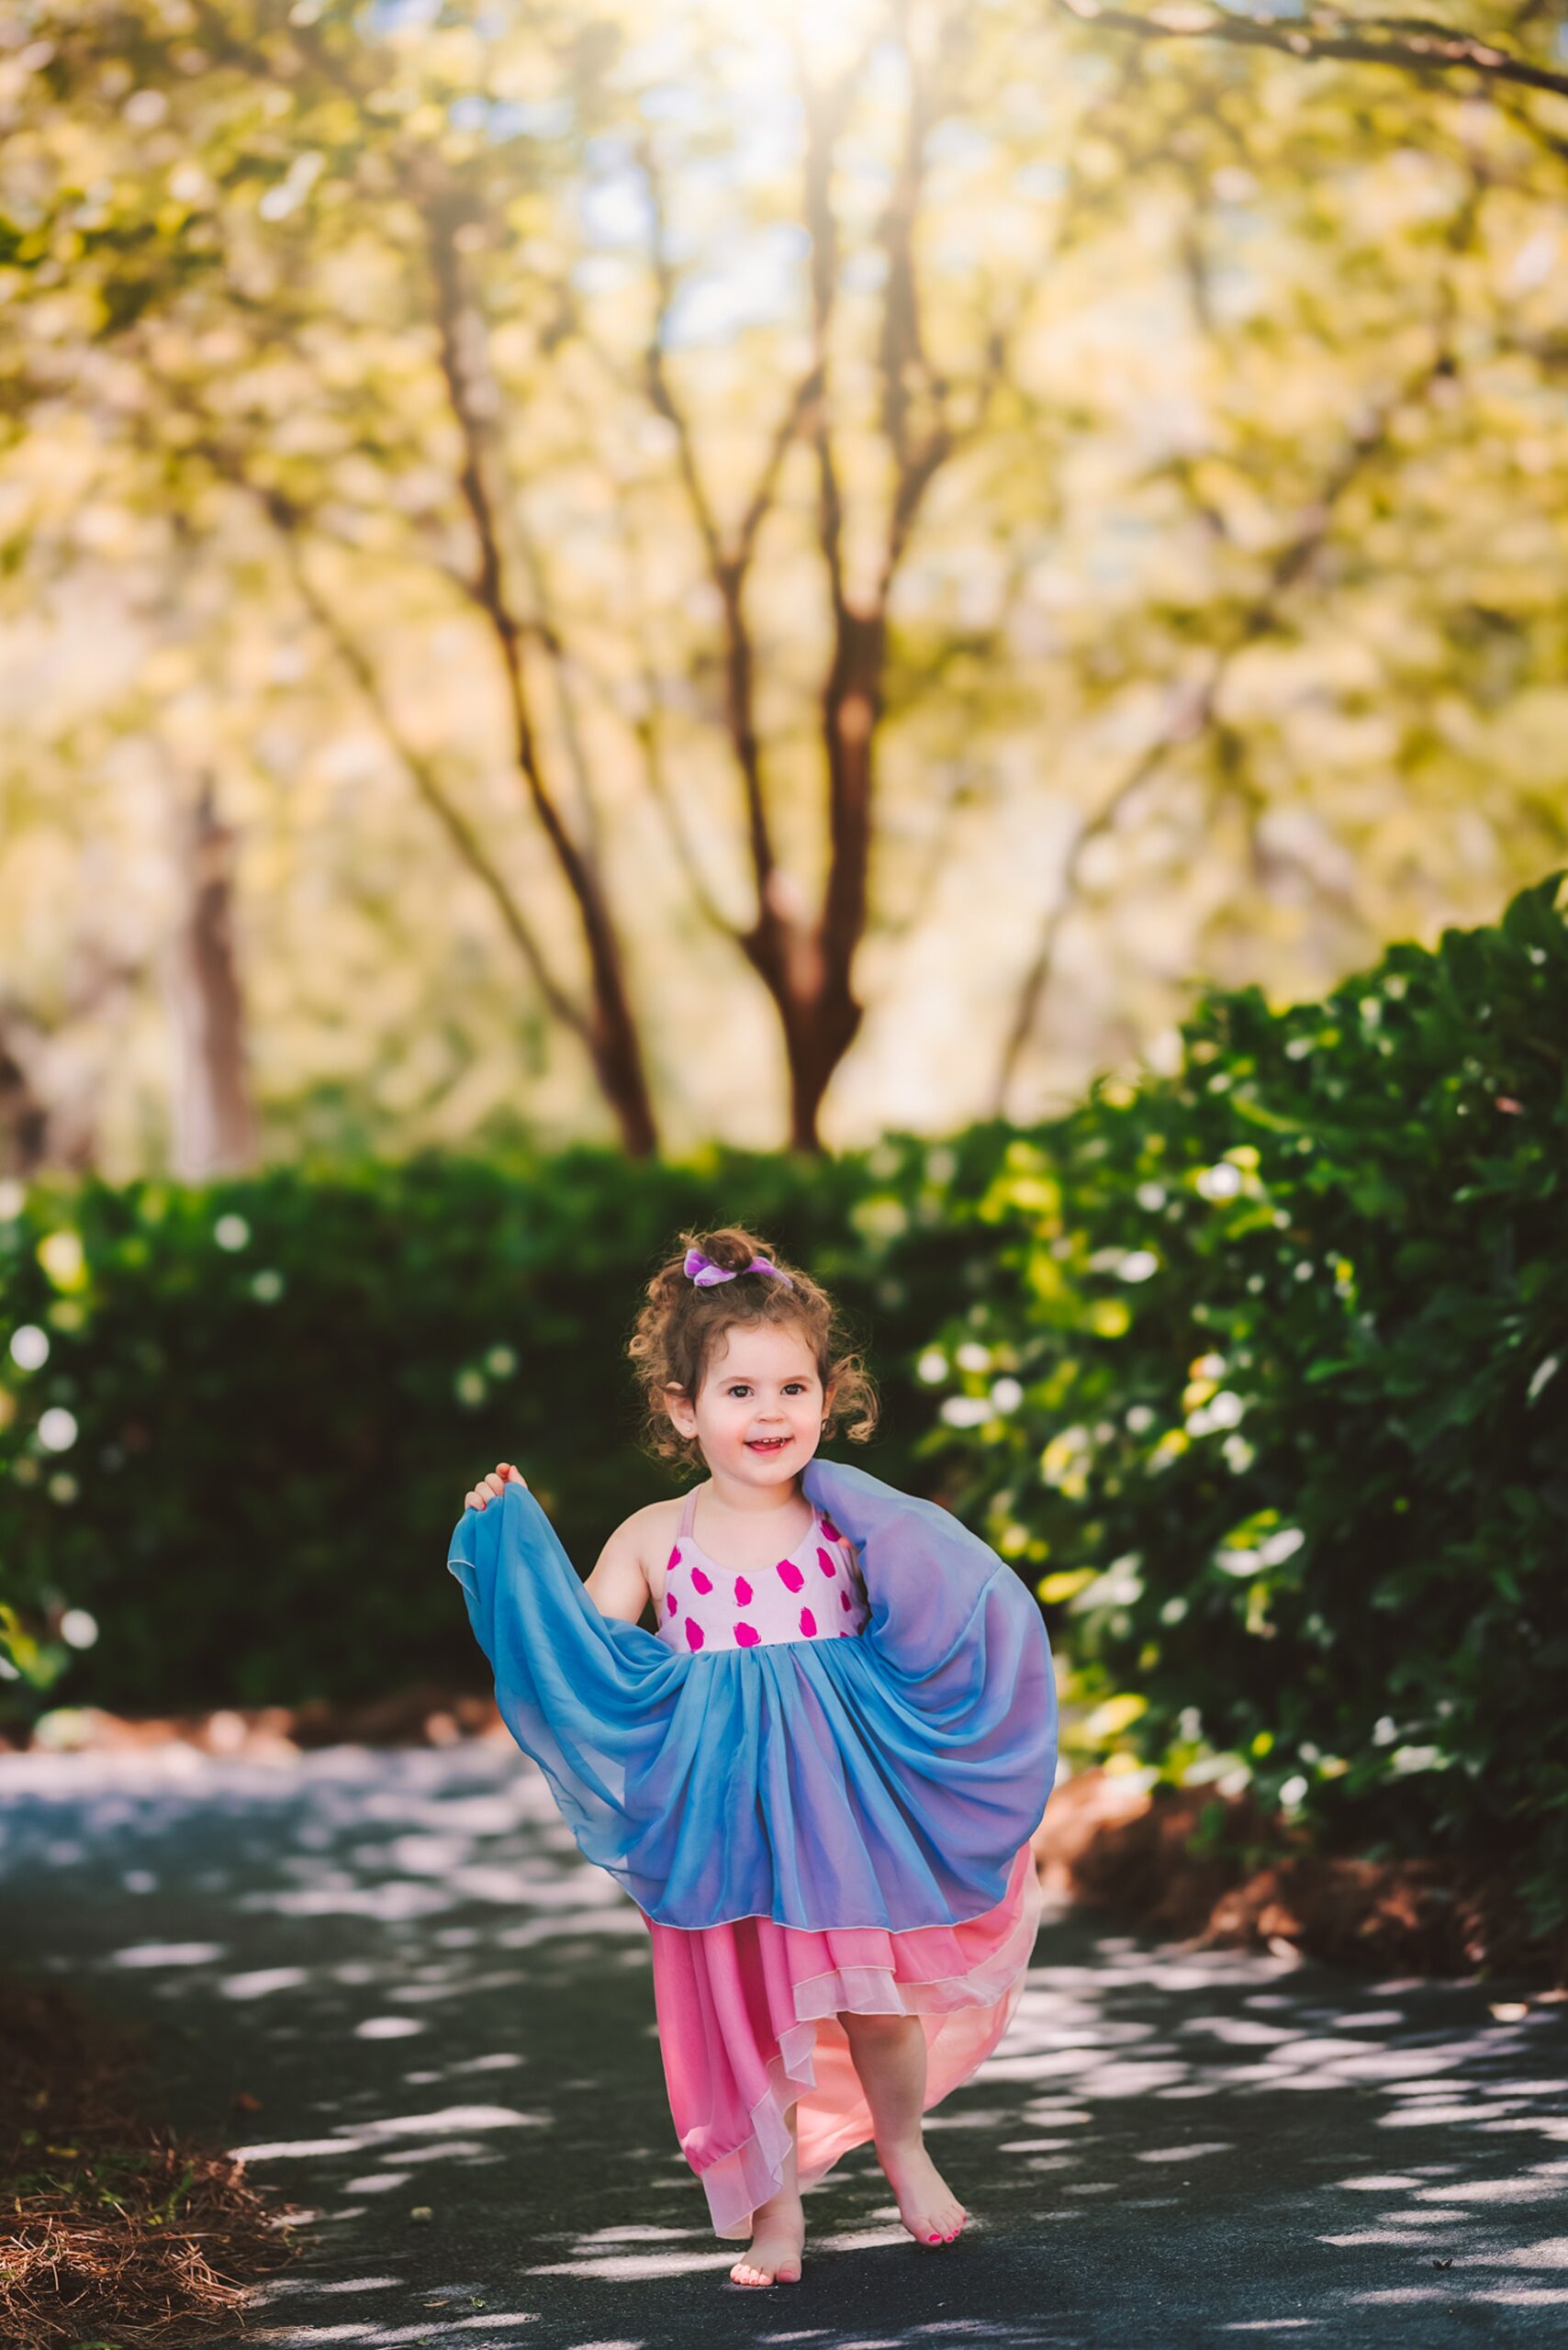 A toddler girl dances in a pink and blue dress in a park path raleigh dance classes